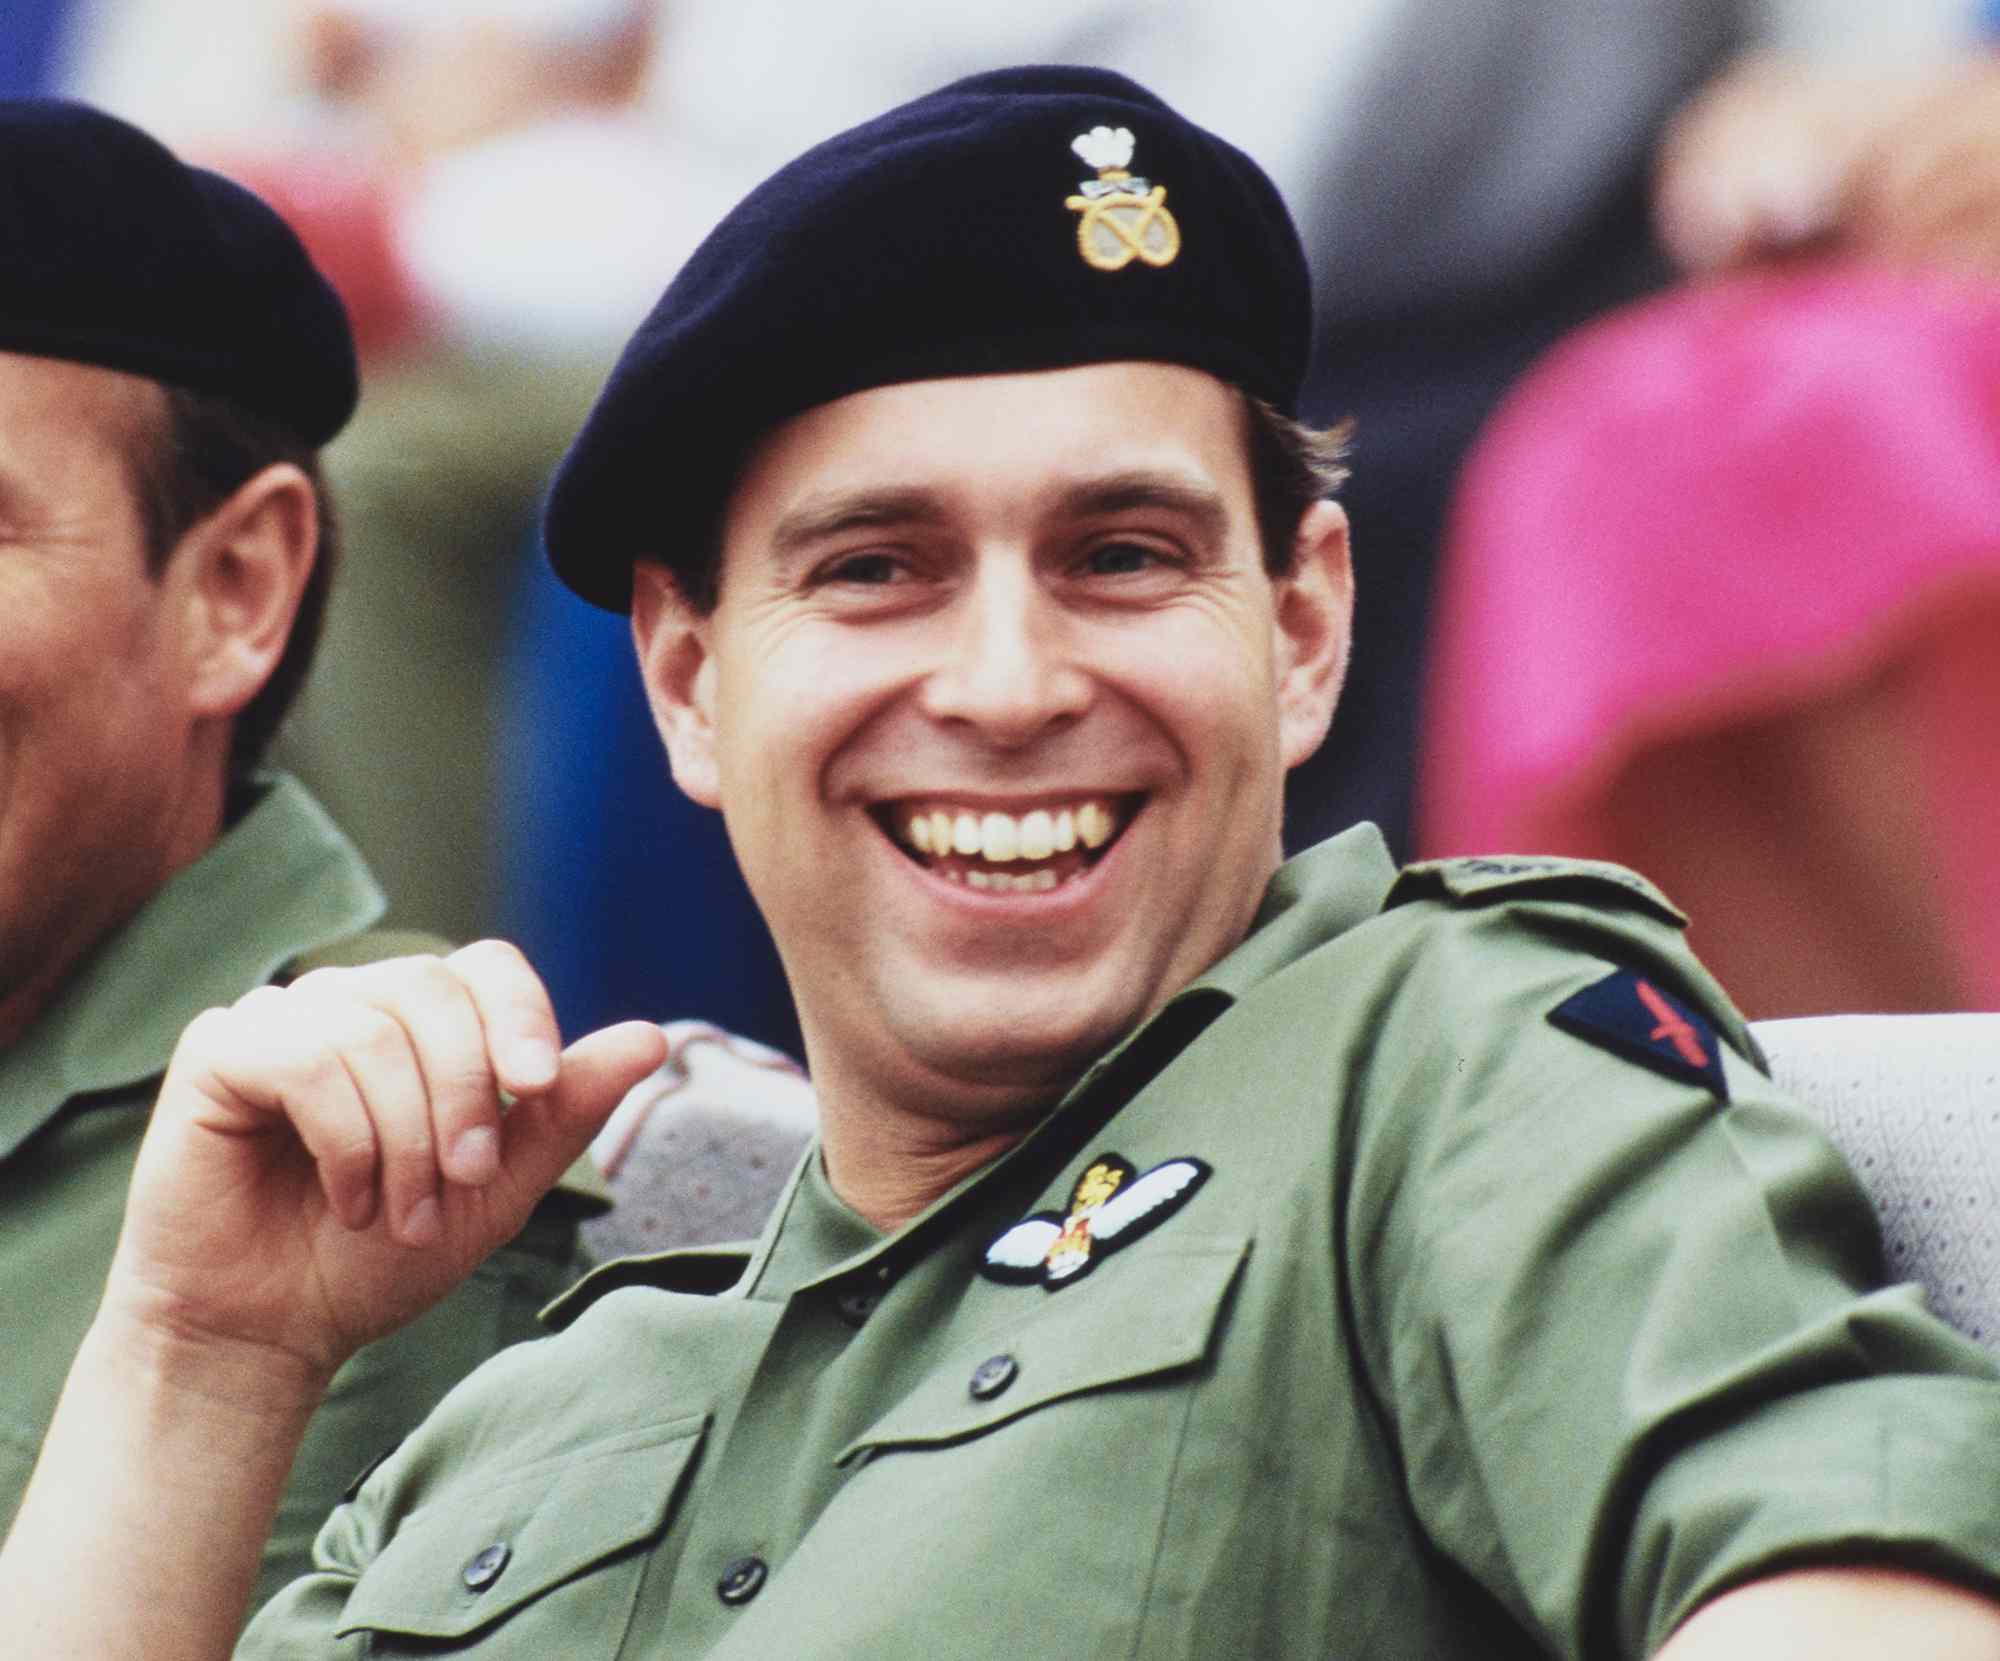 British Royal Prince Andrew, Duke of York, during a visit to the Staffordshire Regiment at Fallingbostel Station barracks in Bad Fallingbostel, Lower Saxony, Germany, 10th July 1989. The Duke is Colonel-in-Chief of the Staffordshire Regiment